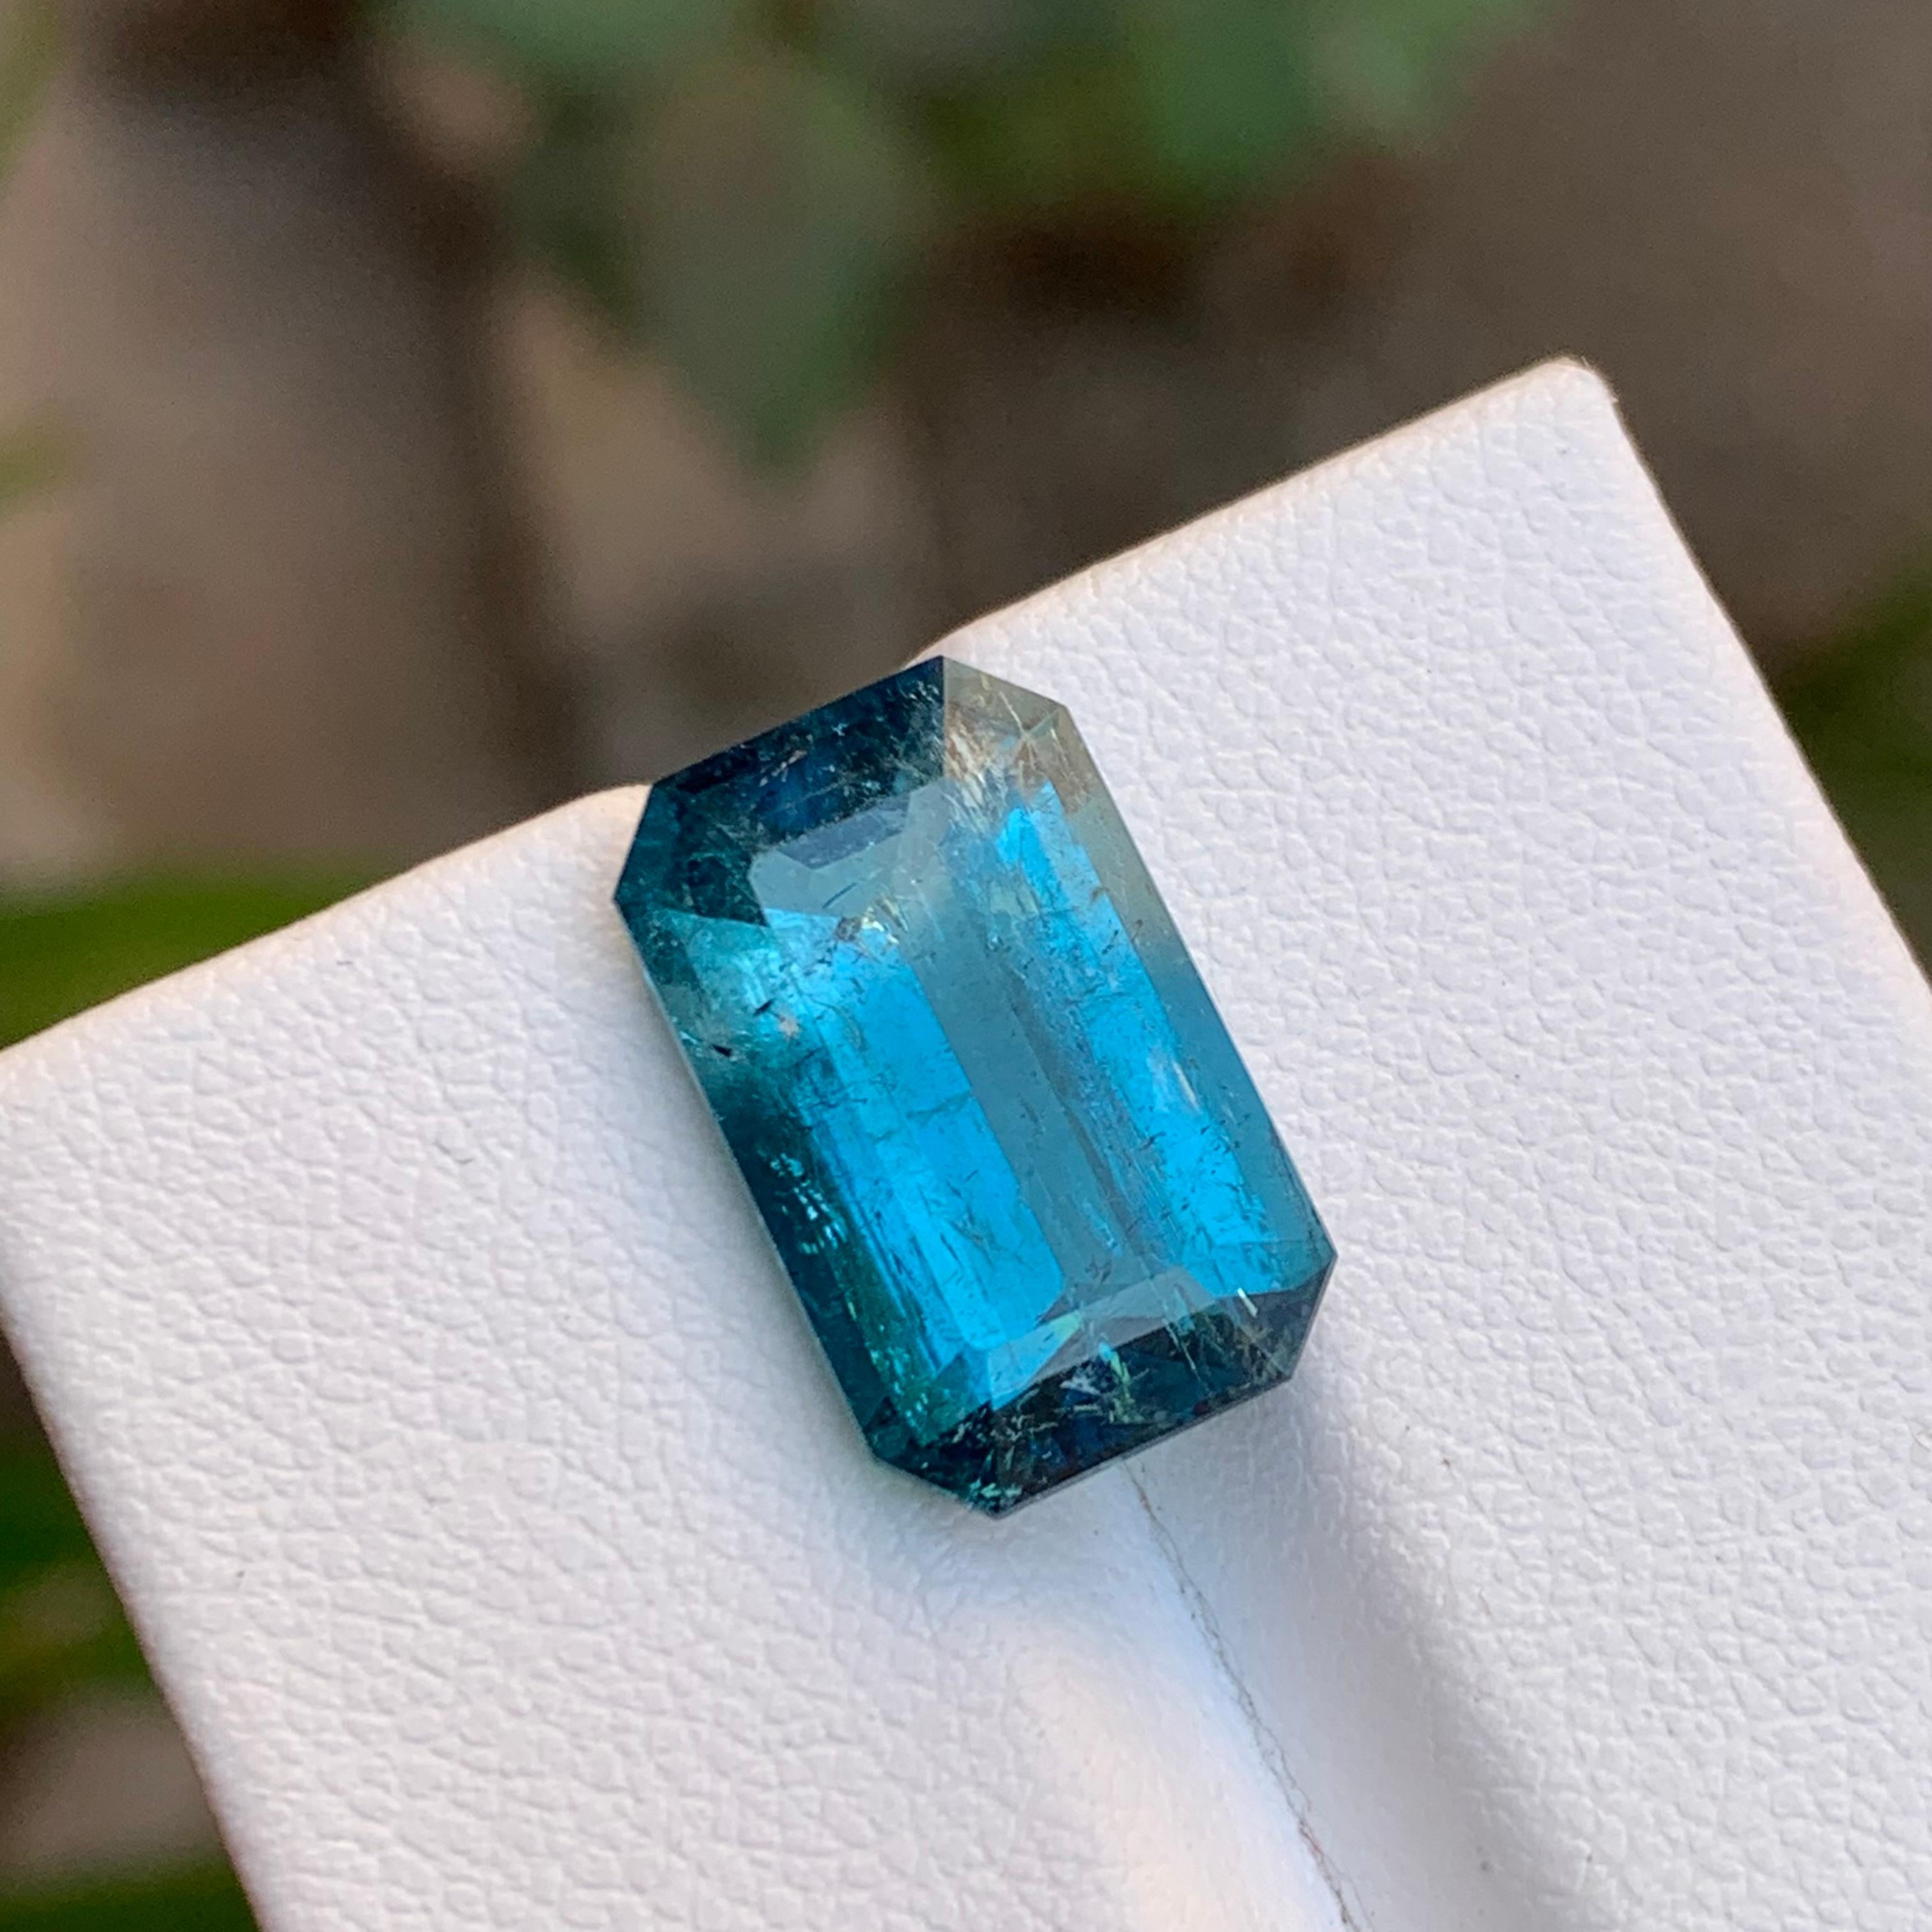 Rare Rich Electric Blue Tourmaline Gemstone 7.20 Ct Emerald Cut for Ring/Pendant For Sale 6